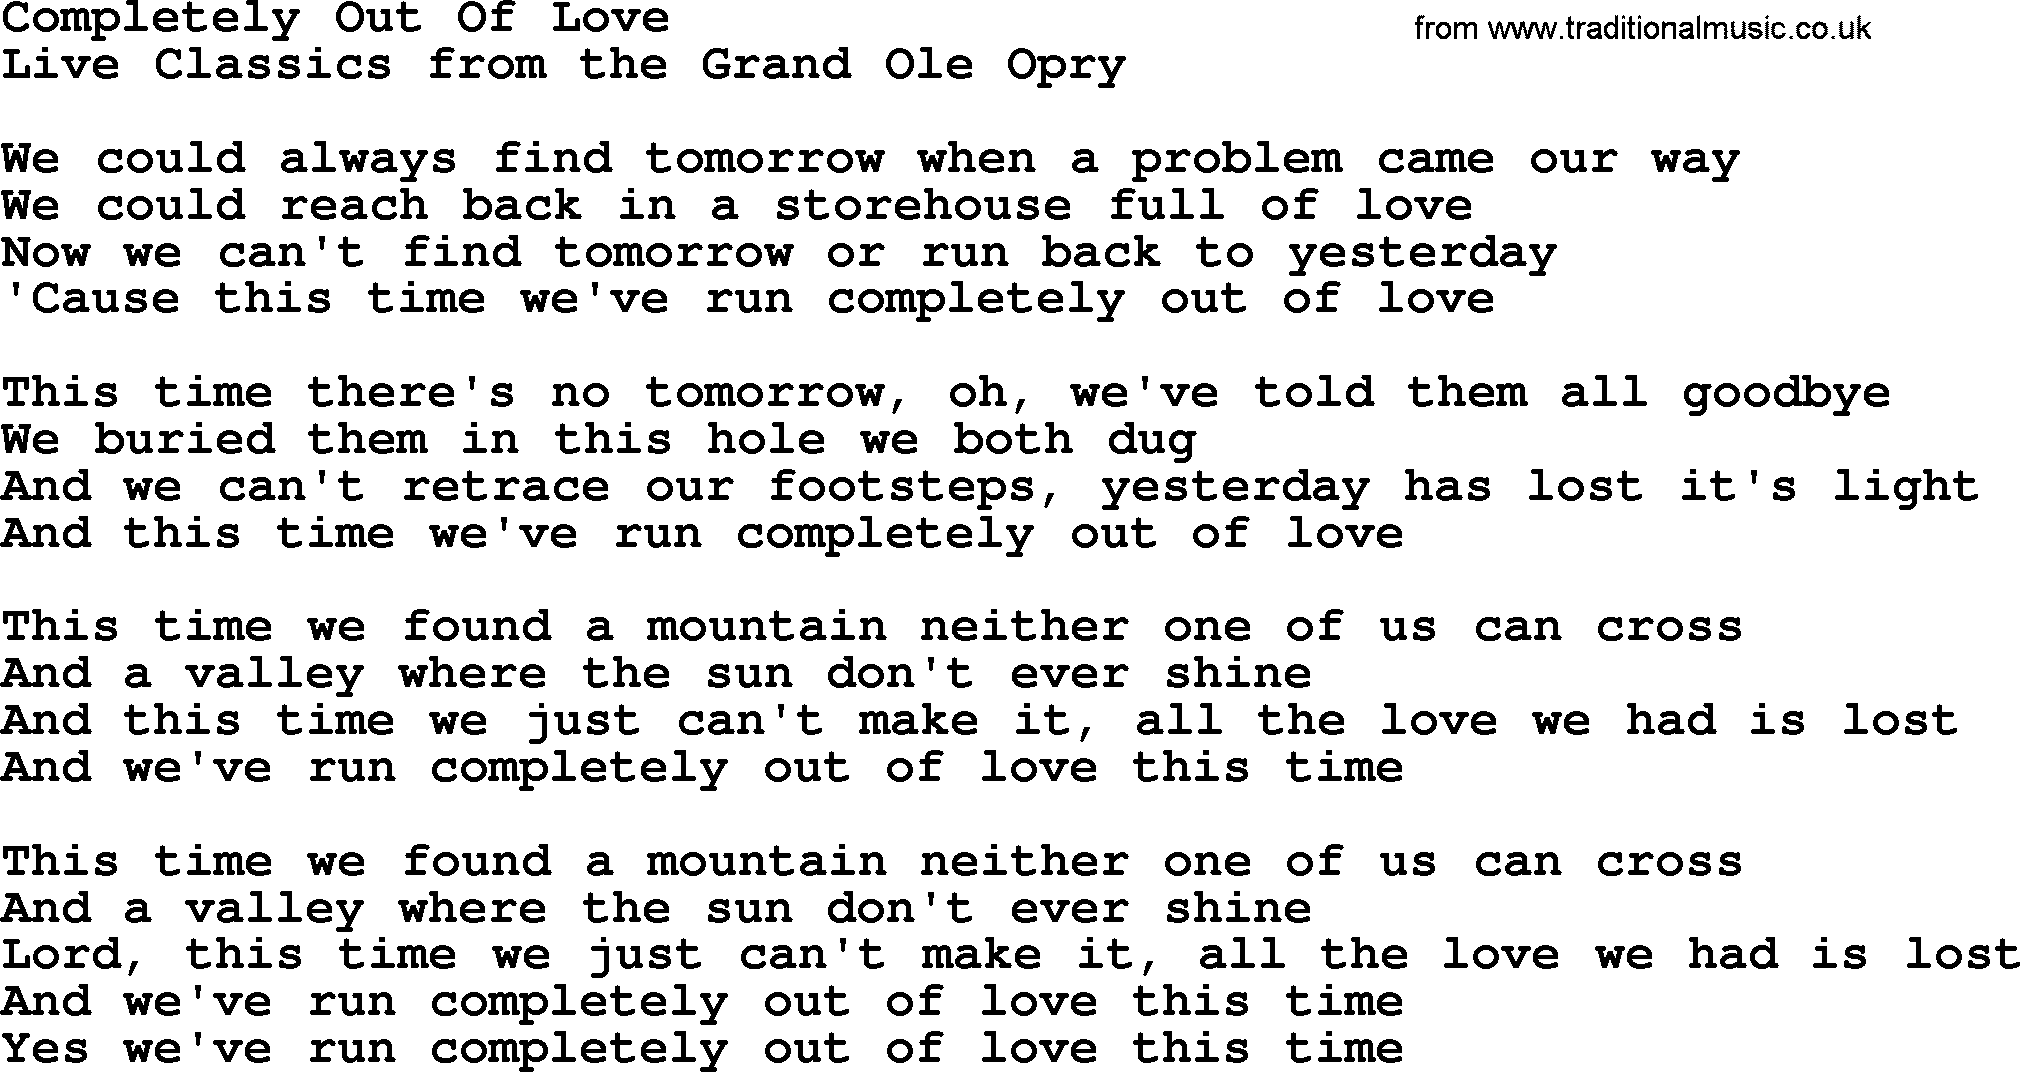 Marty Robbins song: Completely Out Of Love, lyrics